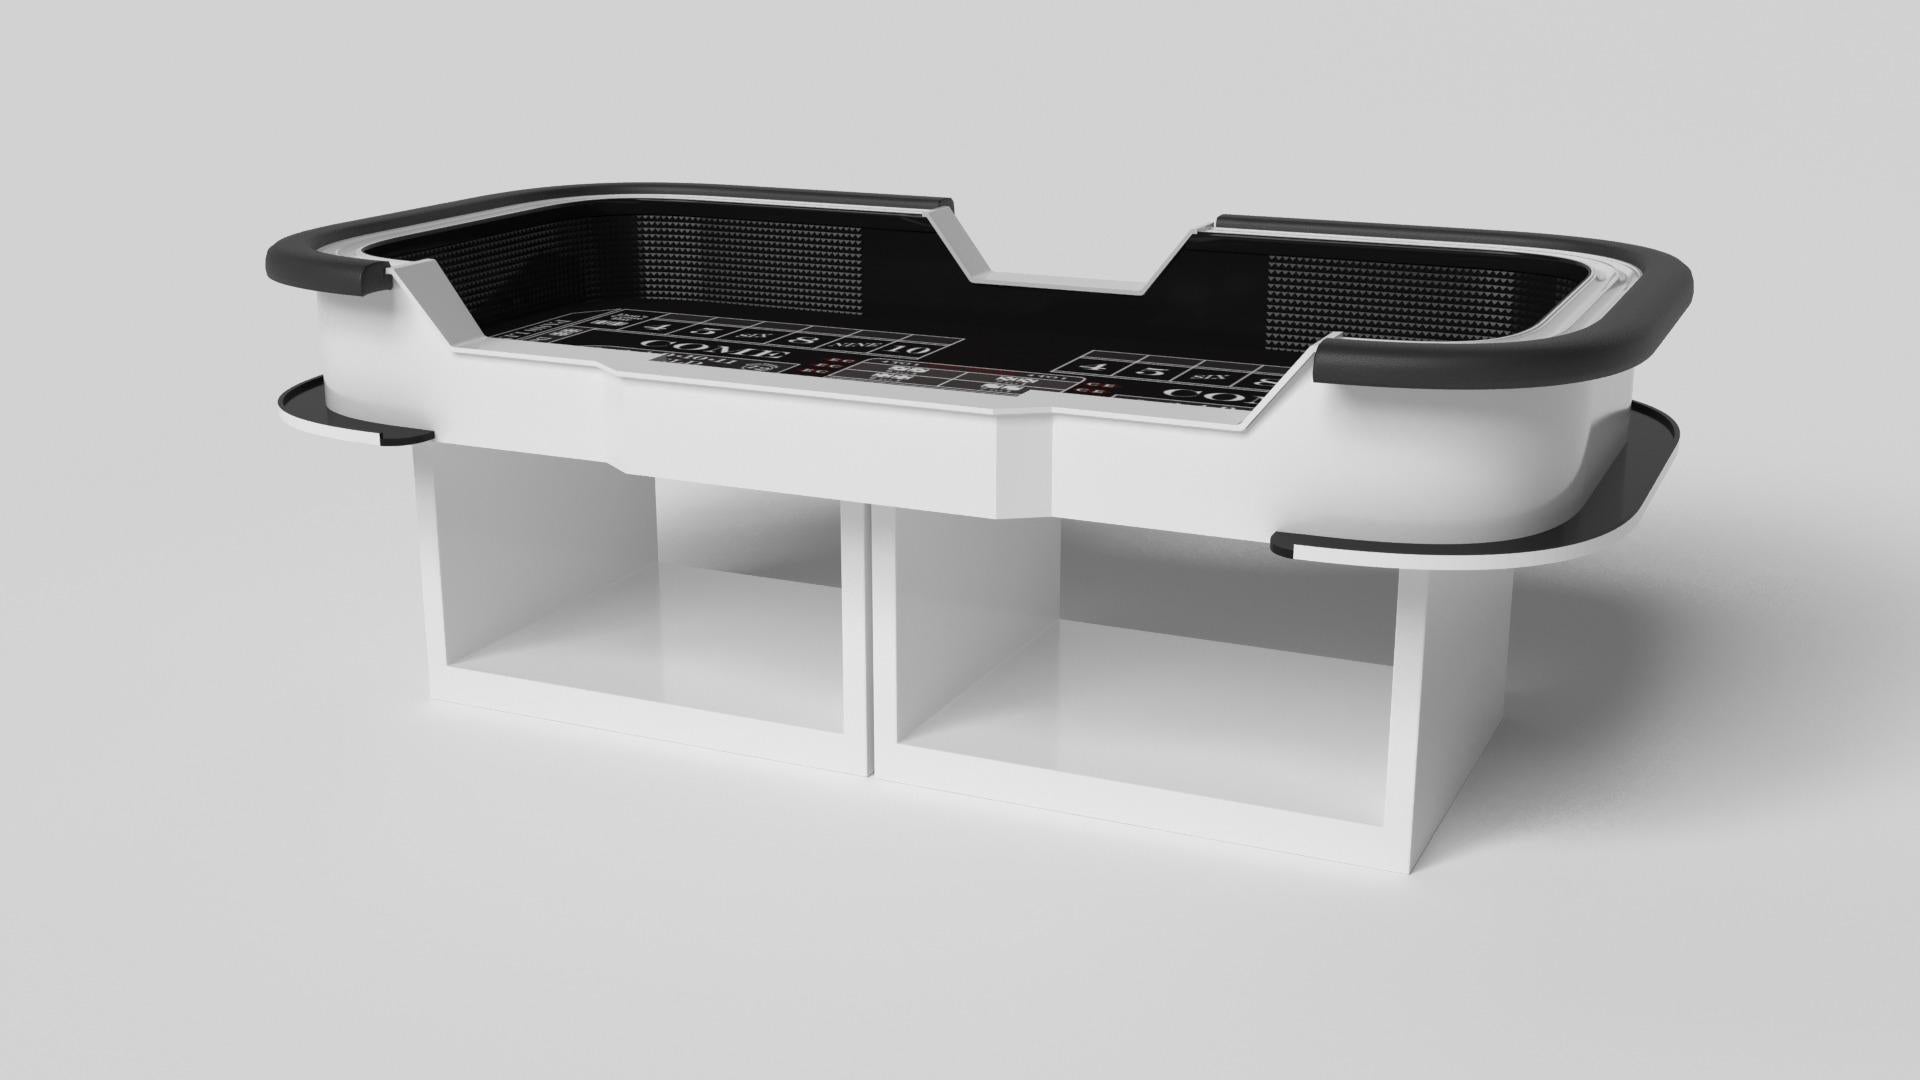 Supported by two rectangular open pedestals as the base, the Ambrosia craps table is modern and minimalistic with its combination of simple, geometric forms. Viewed from the front, the use of negative space is evident; viewed from the side, the base